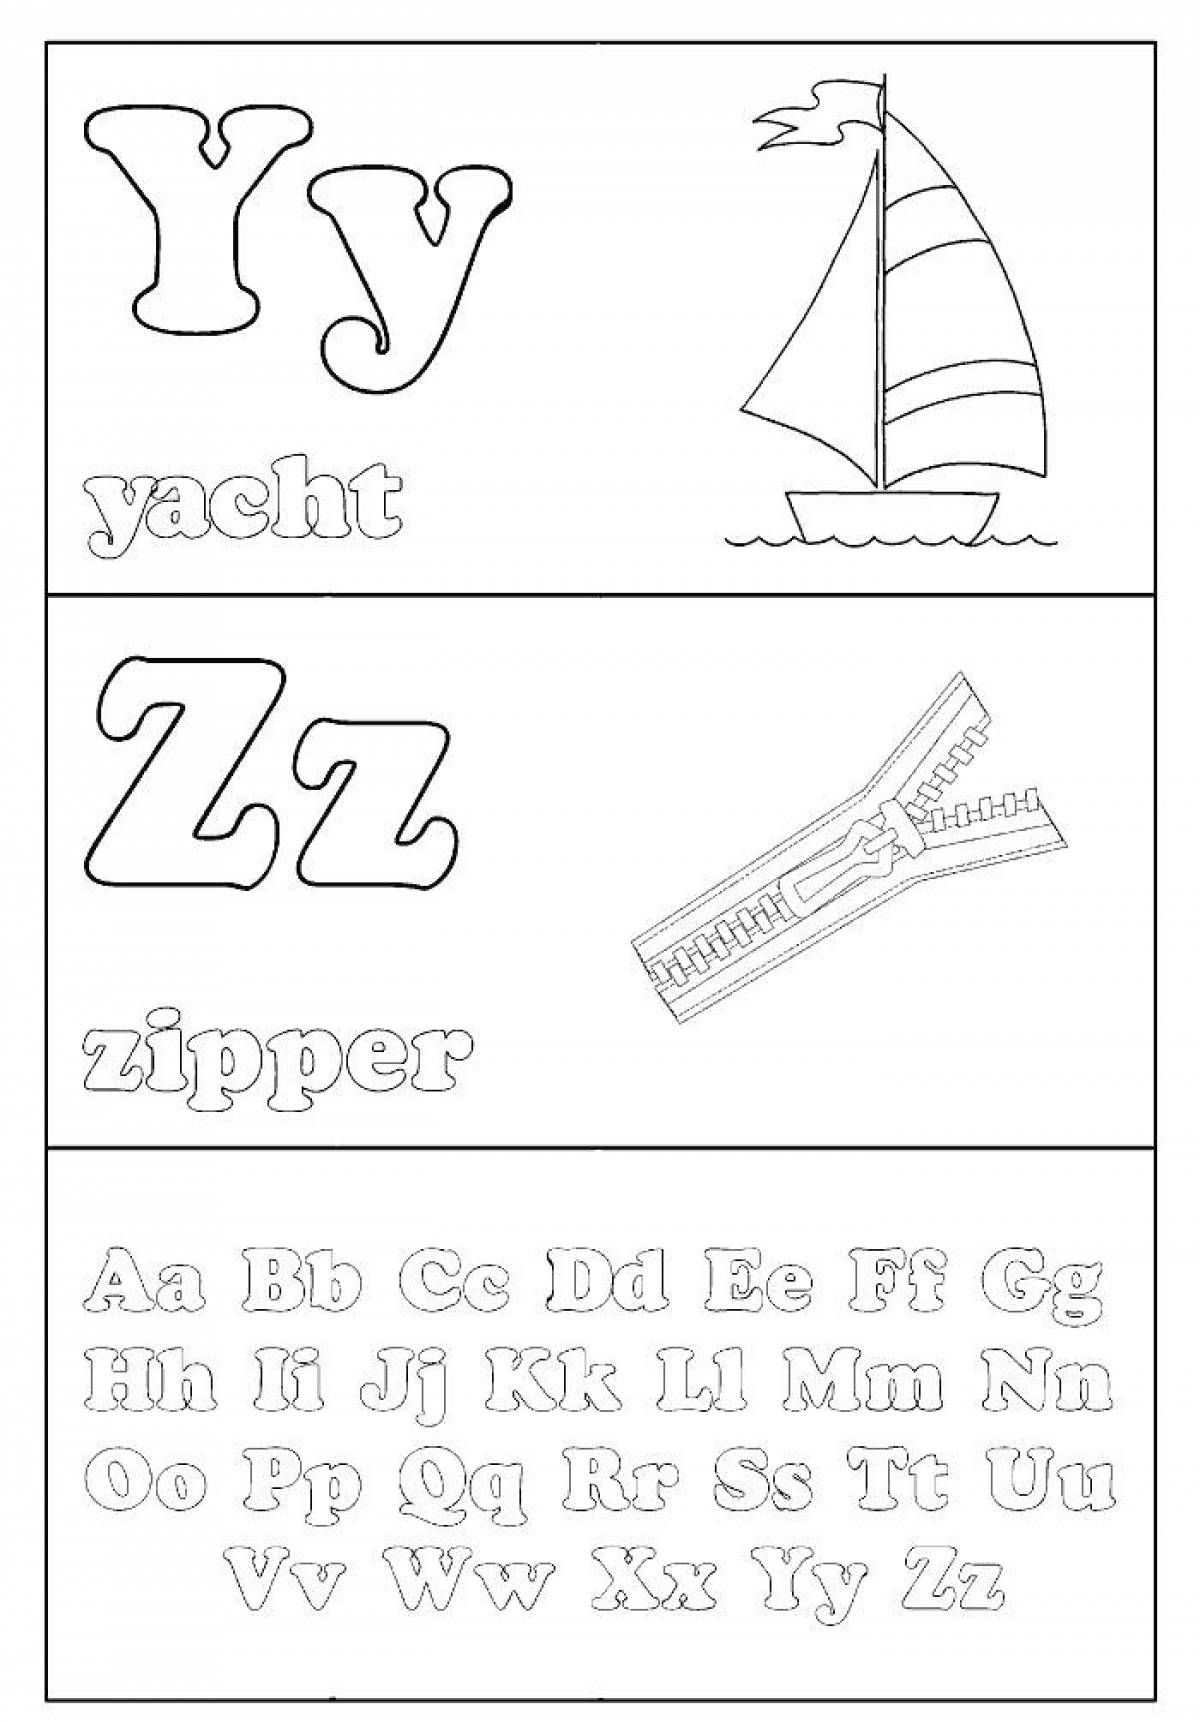 English alphabet in pictures #1